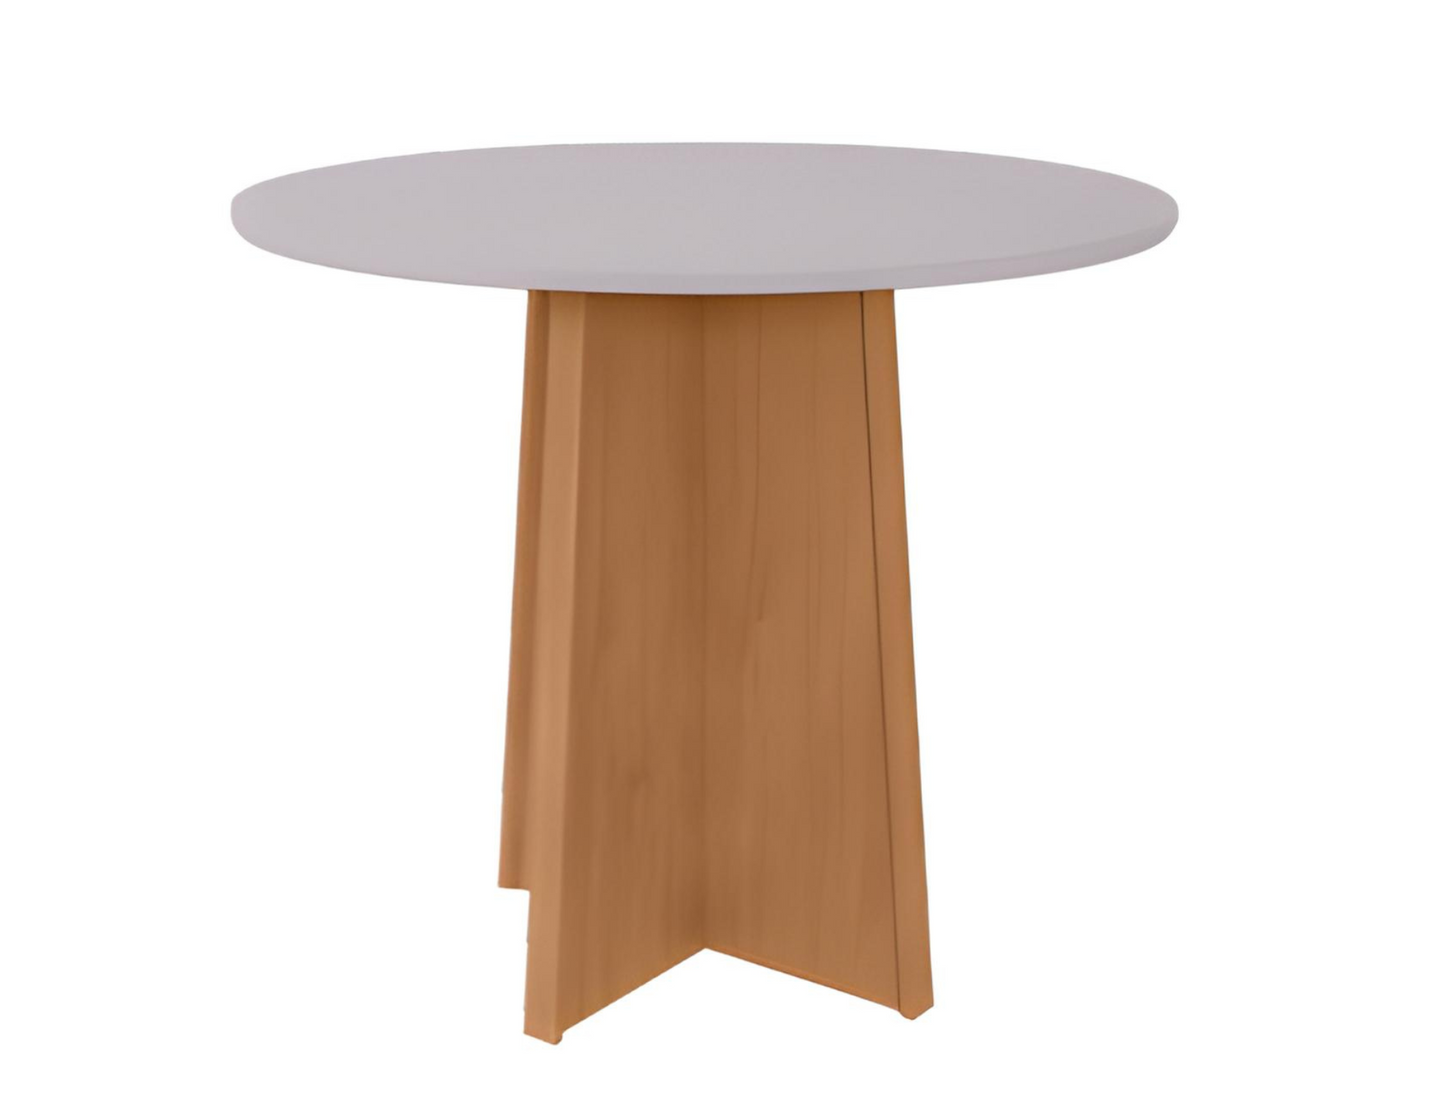 NIRONTEK CELEBRARE TABLE 1.0 ROUND - Modern Chic with Glass Accent